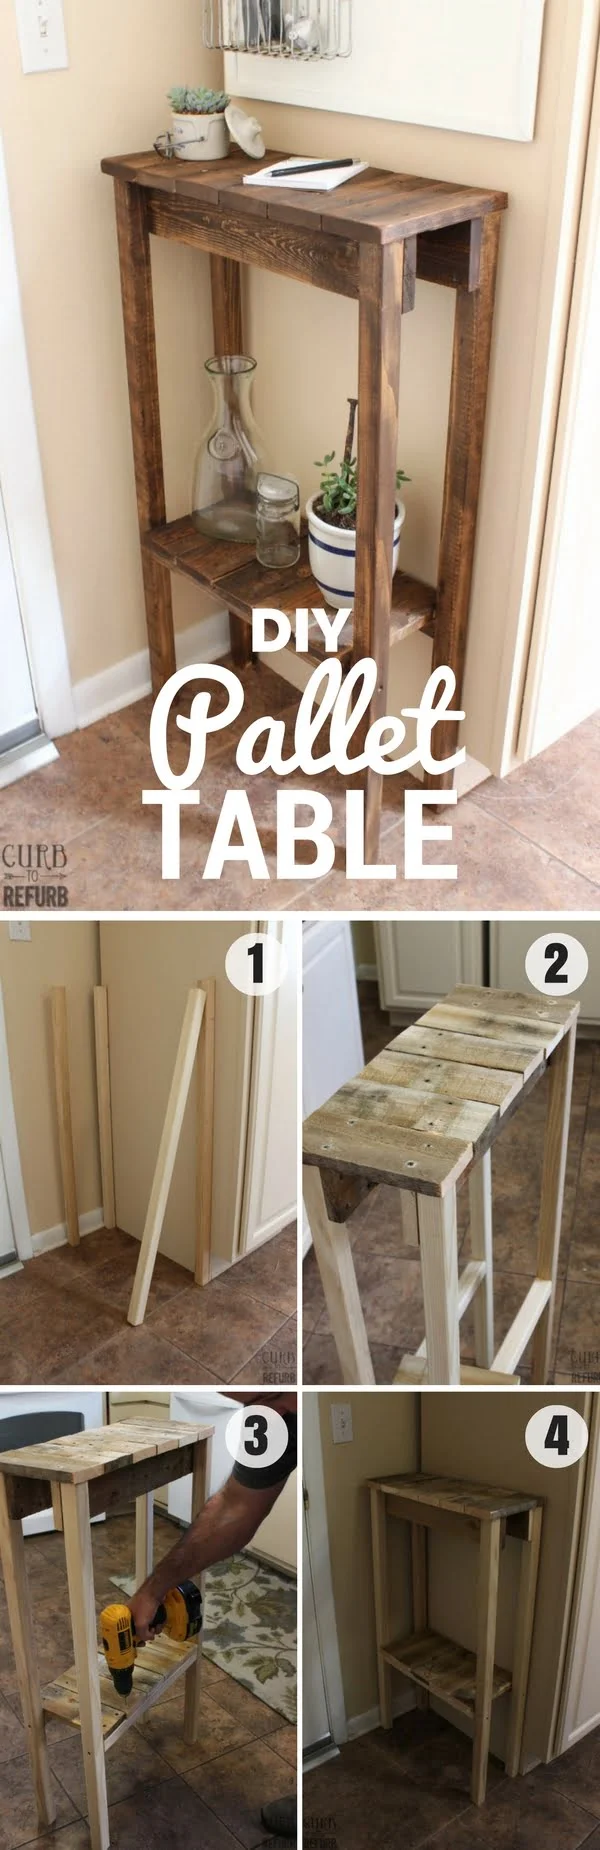 Check out how to build this easy DIY Pallet Table